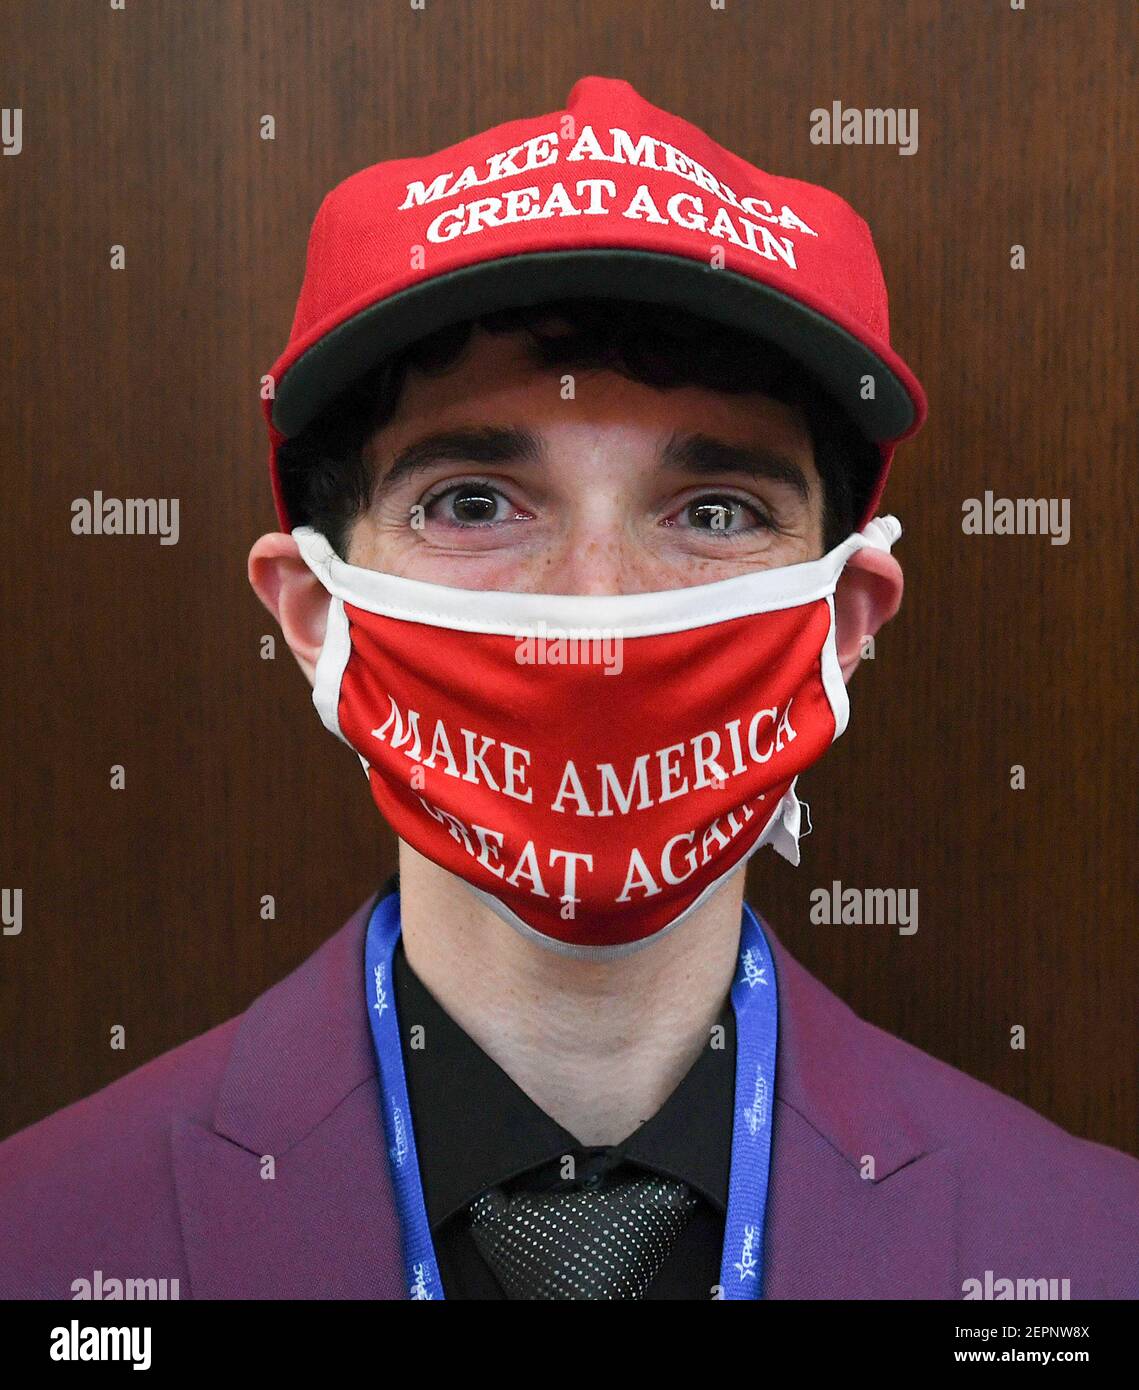 Orlando, United States. 27th Feb, 2021. Eric Simon poses wearing a MAGA hat and face mask at the 2021 Conservative Political Action Conference at the Hyatt Regency. Former U.S. President Donald Trump is scheduled to speak on the final day of the conference. Credit: SOPA Images Limited/Alamy Live News Stock Photo